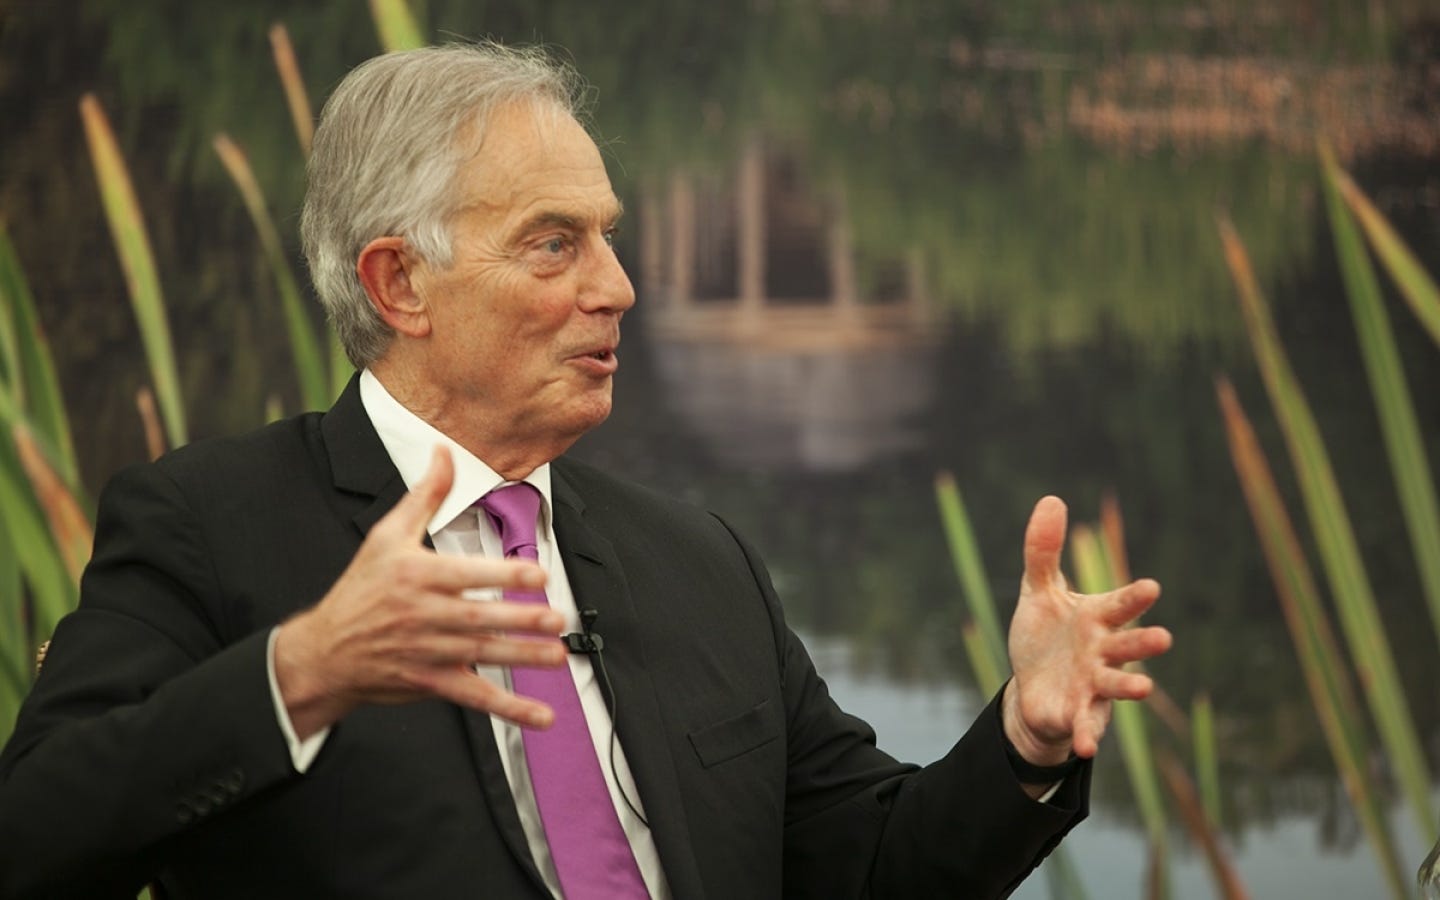 Tony Blair's Speech: After Ukraine, What Lessons Now for Western  Leadership? | Institute for Global Change